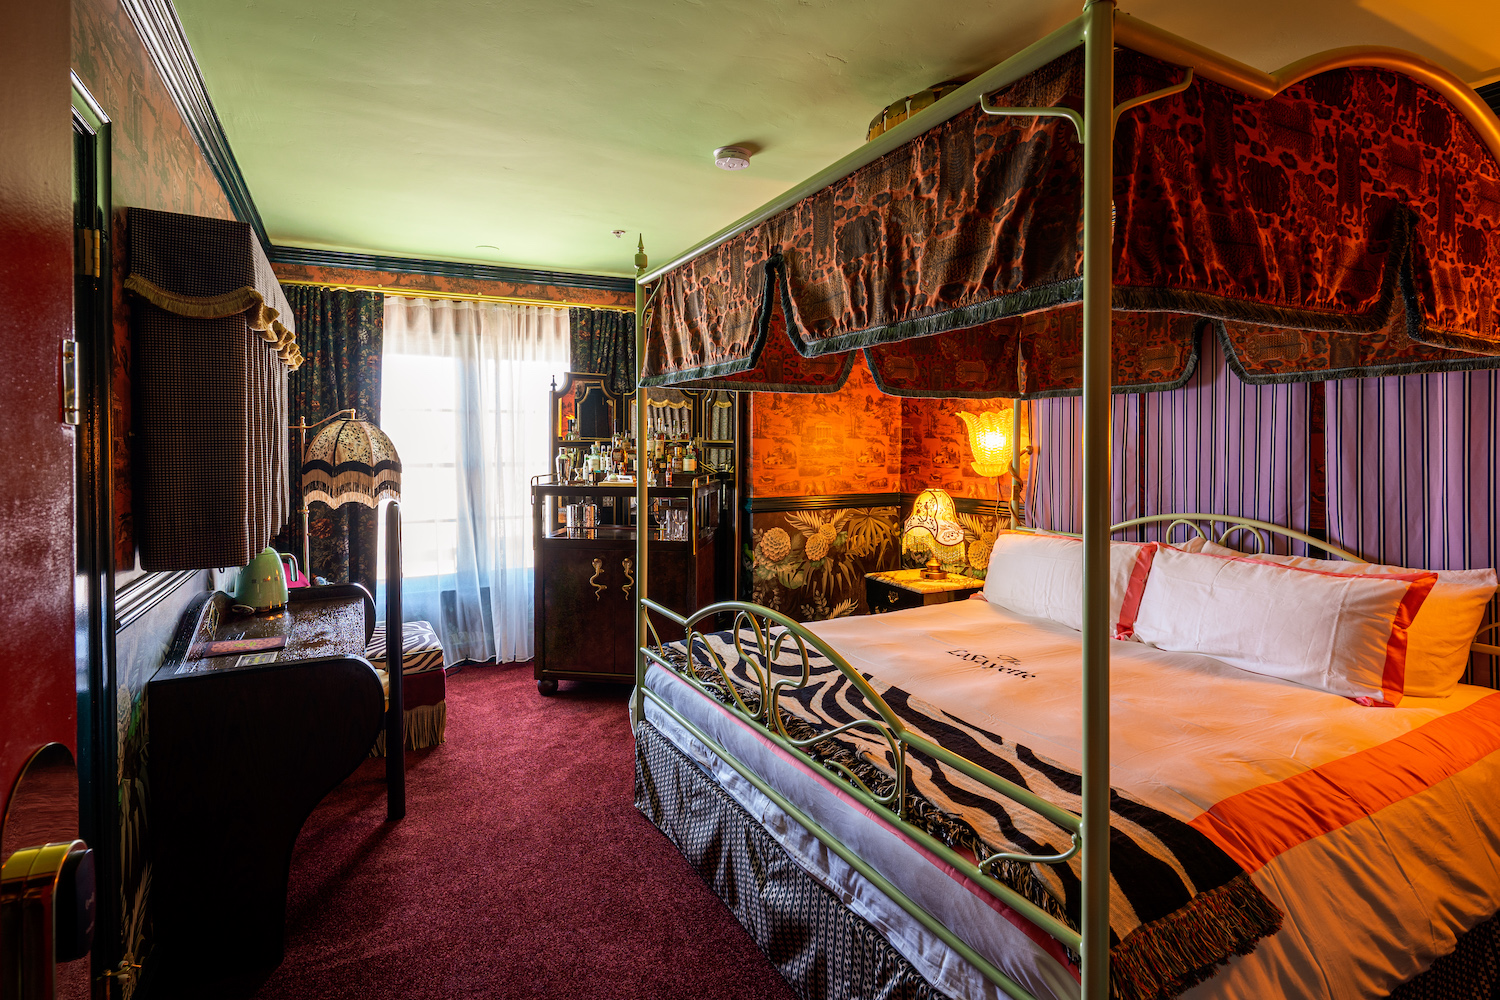 Victorian-style hotel room with bedding, a bar and dresser